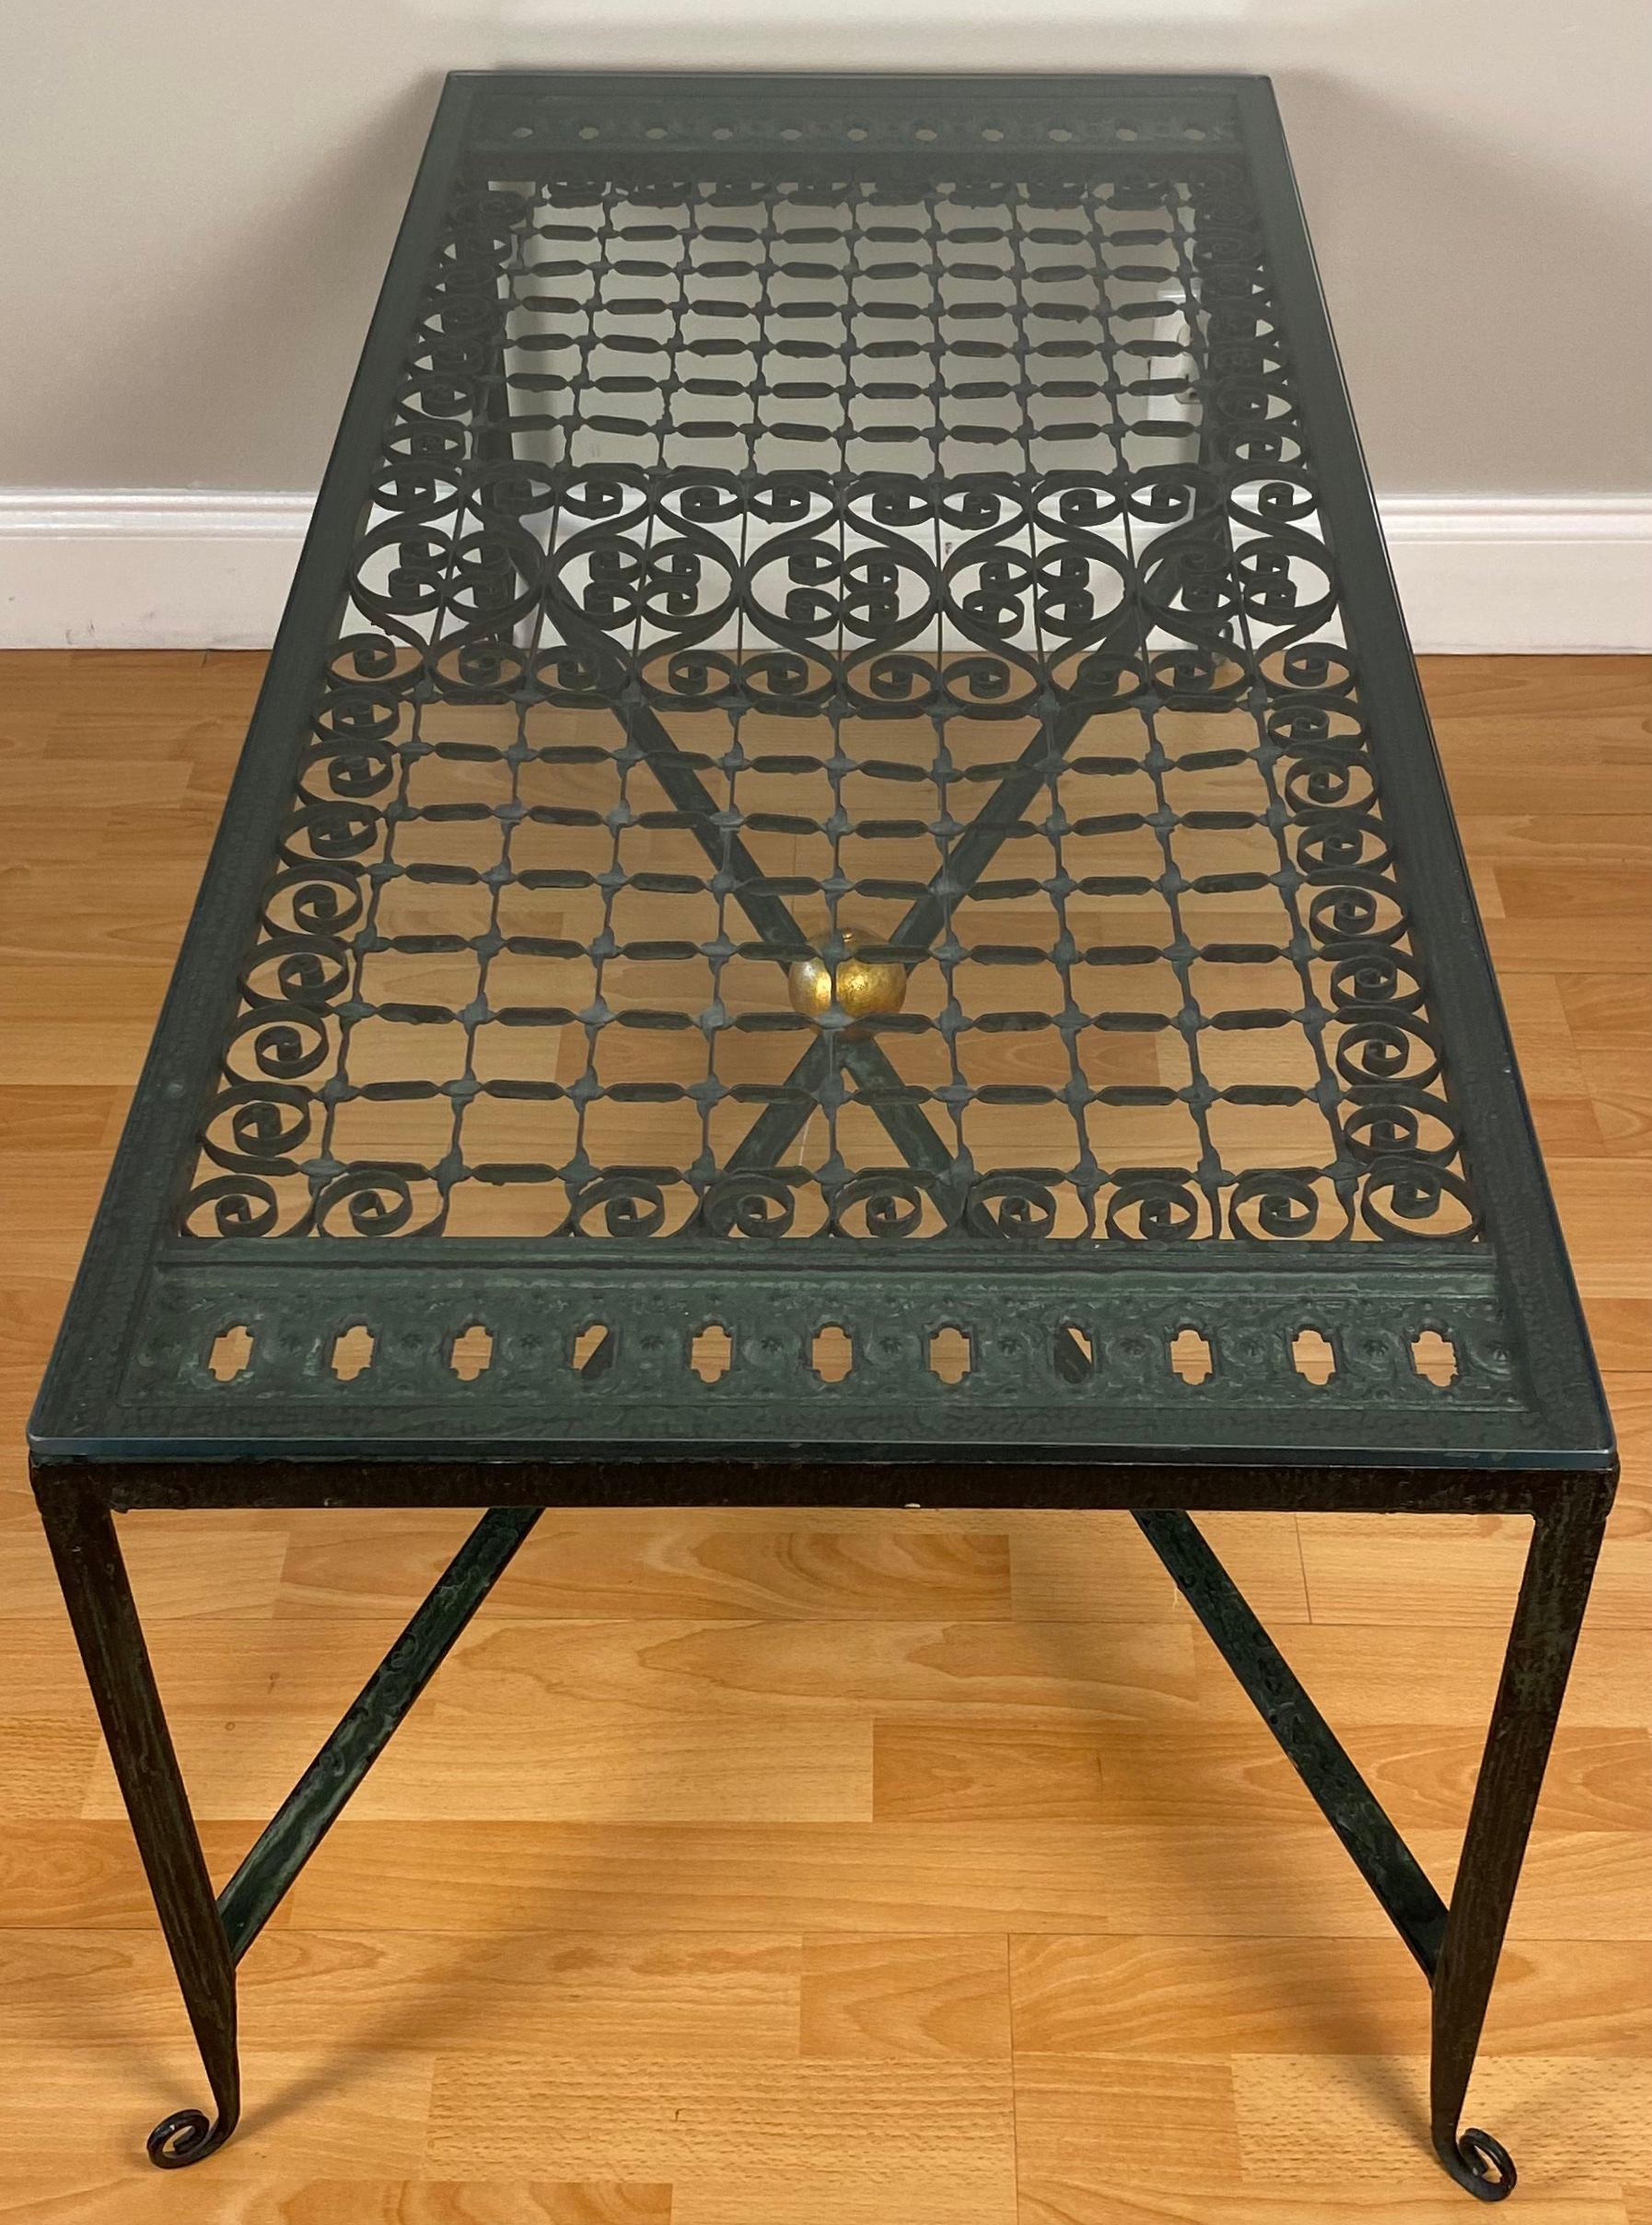 A very good quality mid-century wrought iron cocktail or coffee table with accents in the form of an architectural gate or grille and raised on four legs supported by a top inset with a thick flush-mounted glass. 

Patinated finish. 

Measures: 50